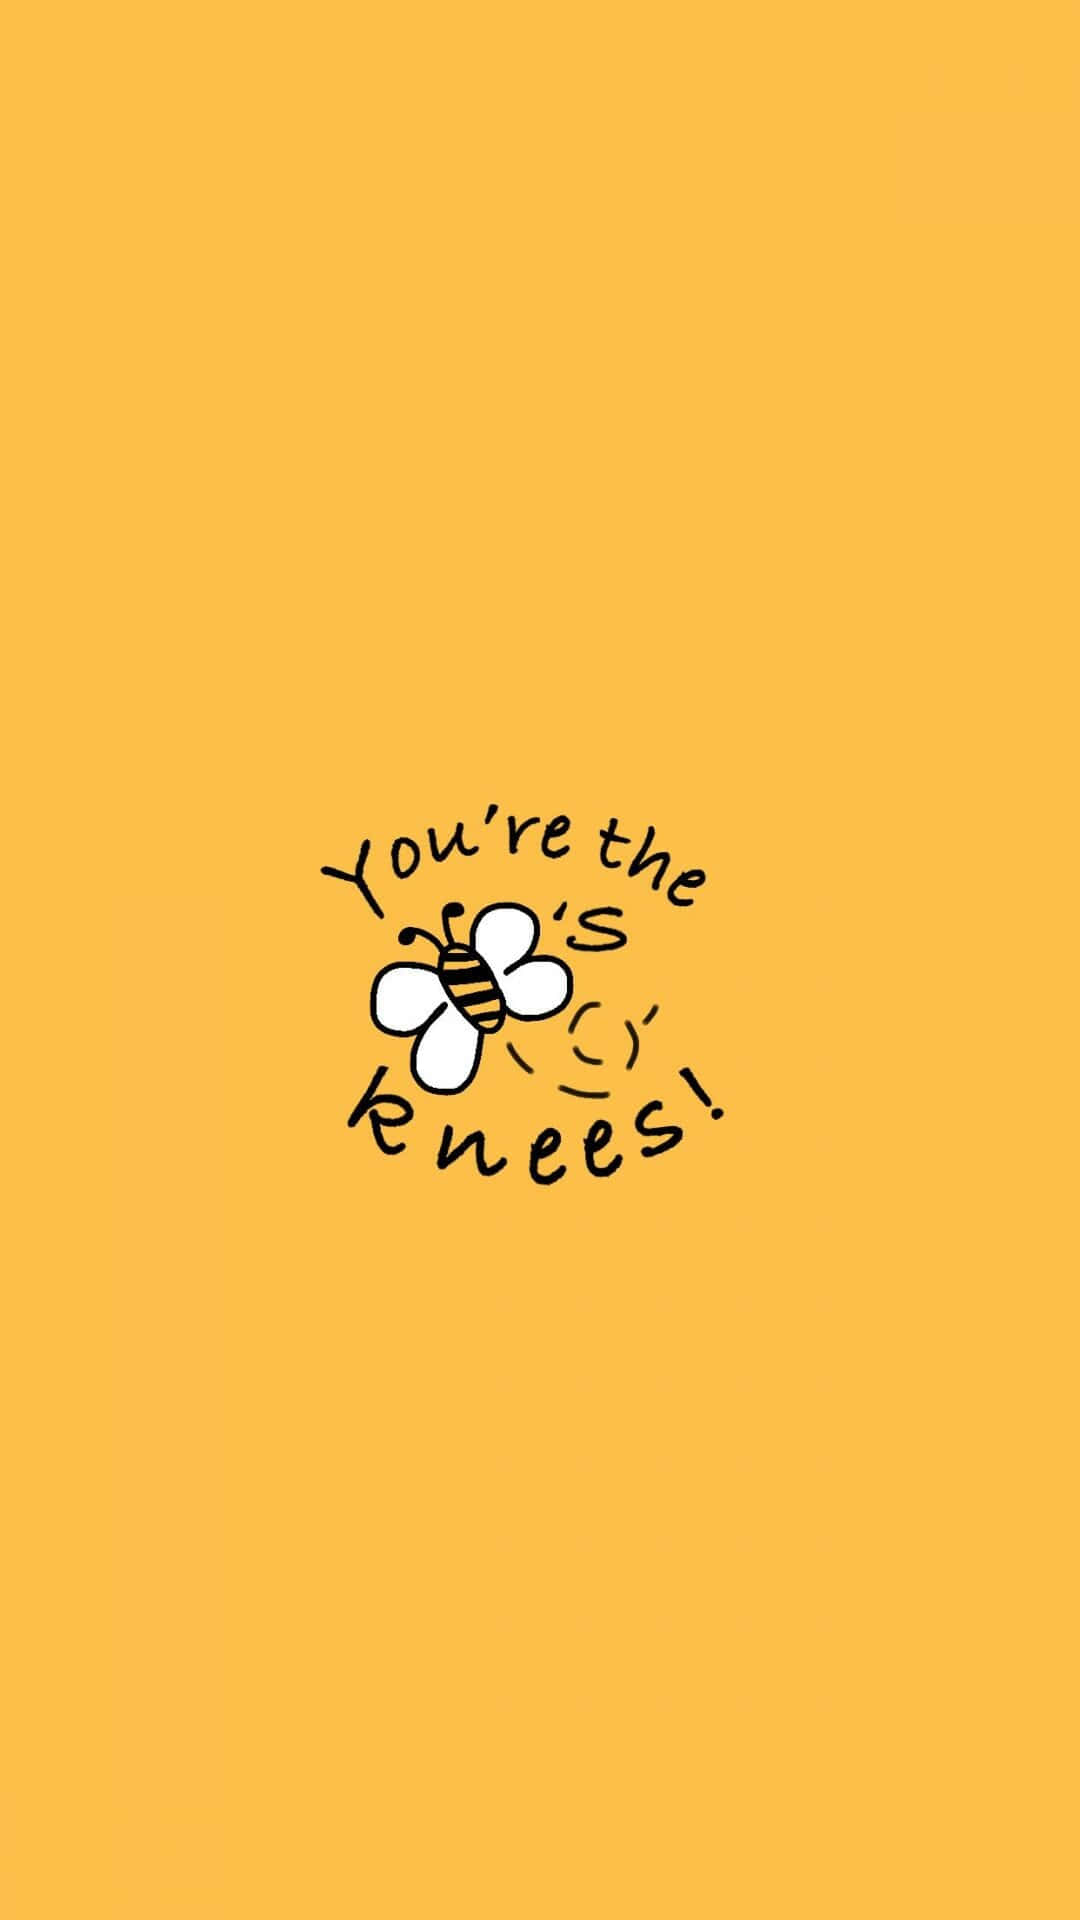 You're the bees - Positivity